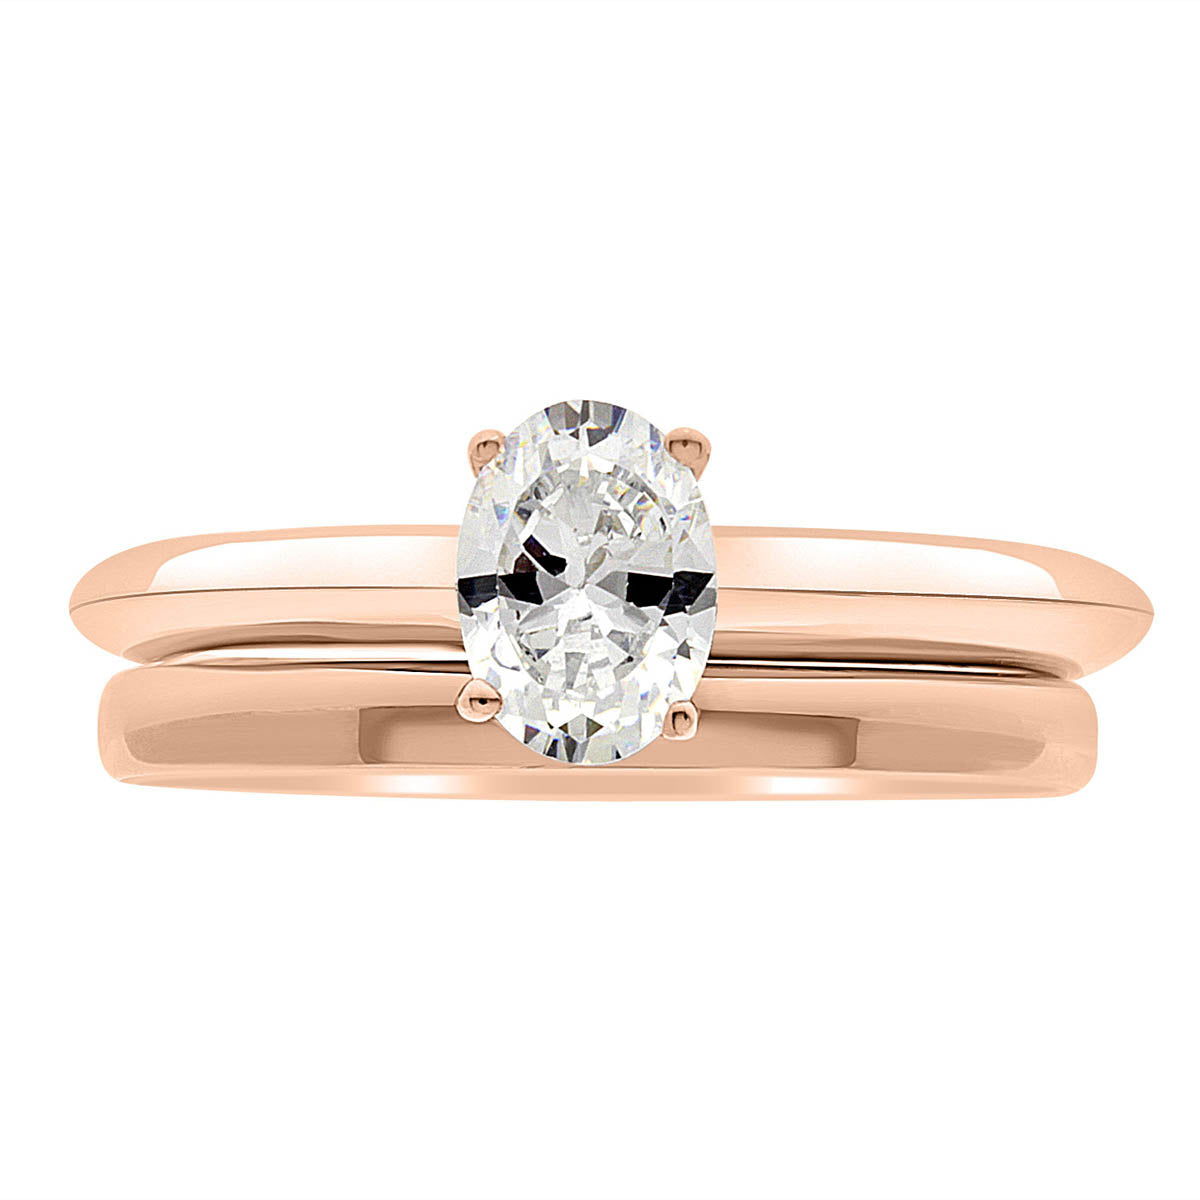 Knife Edge Band Engagement Ring in yellow gold metal with a plain wedding band